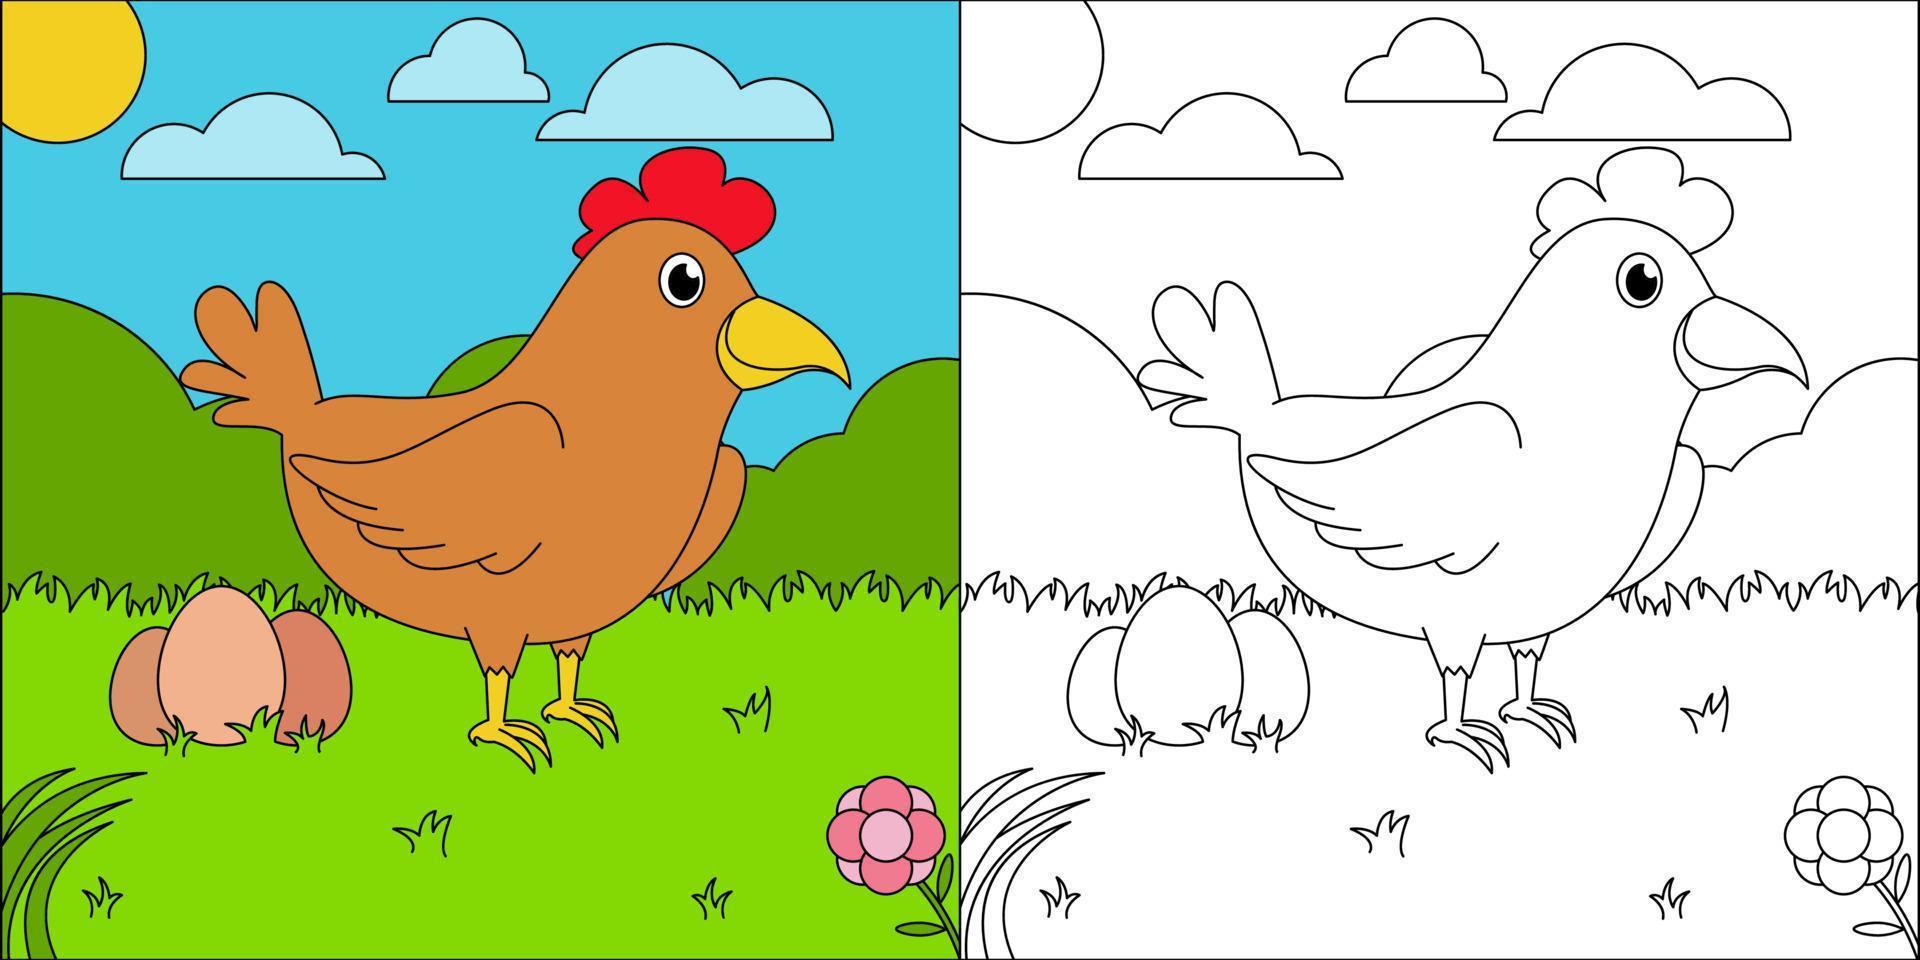 Chicken laying eggs suitable for children's coloring page vector illustration